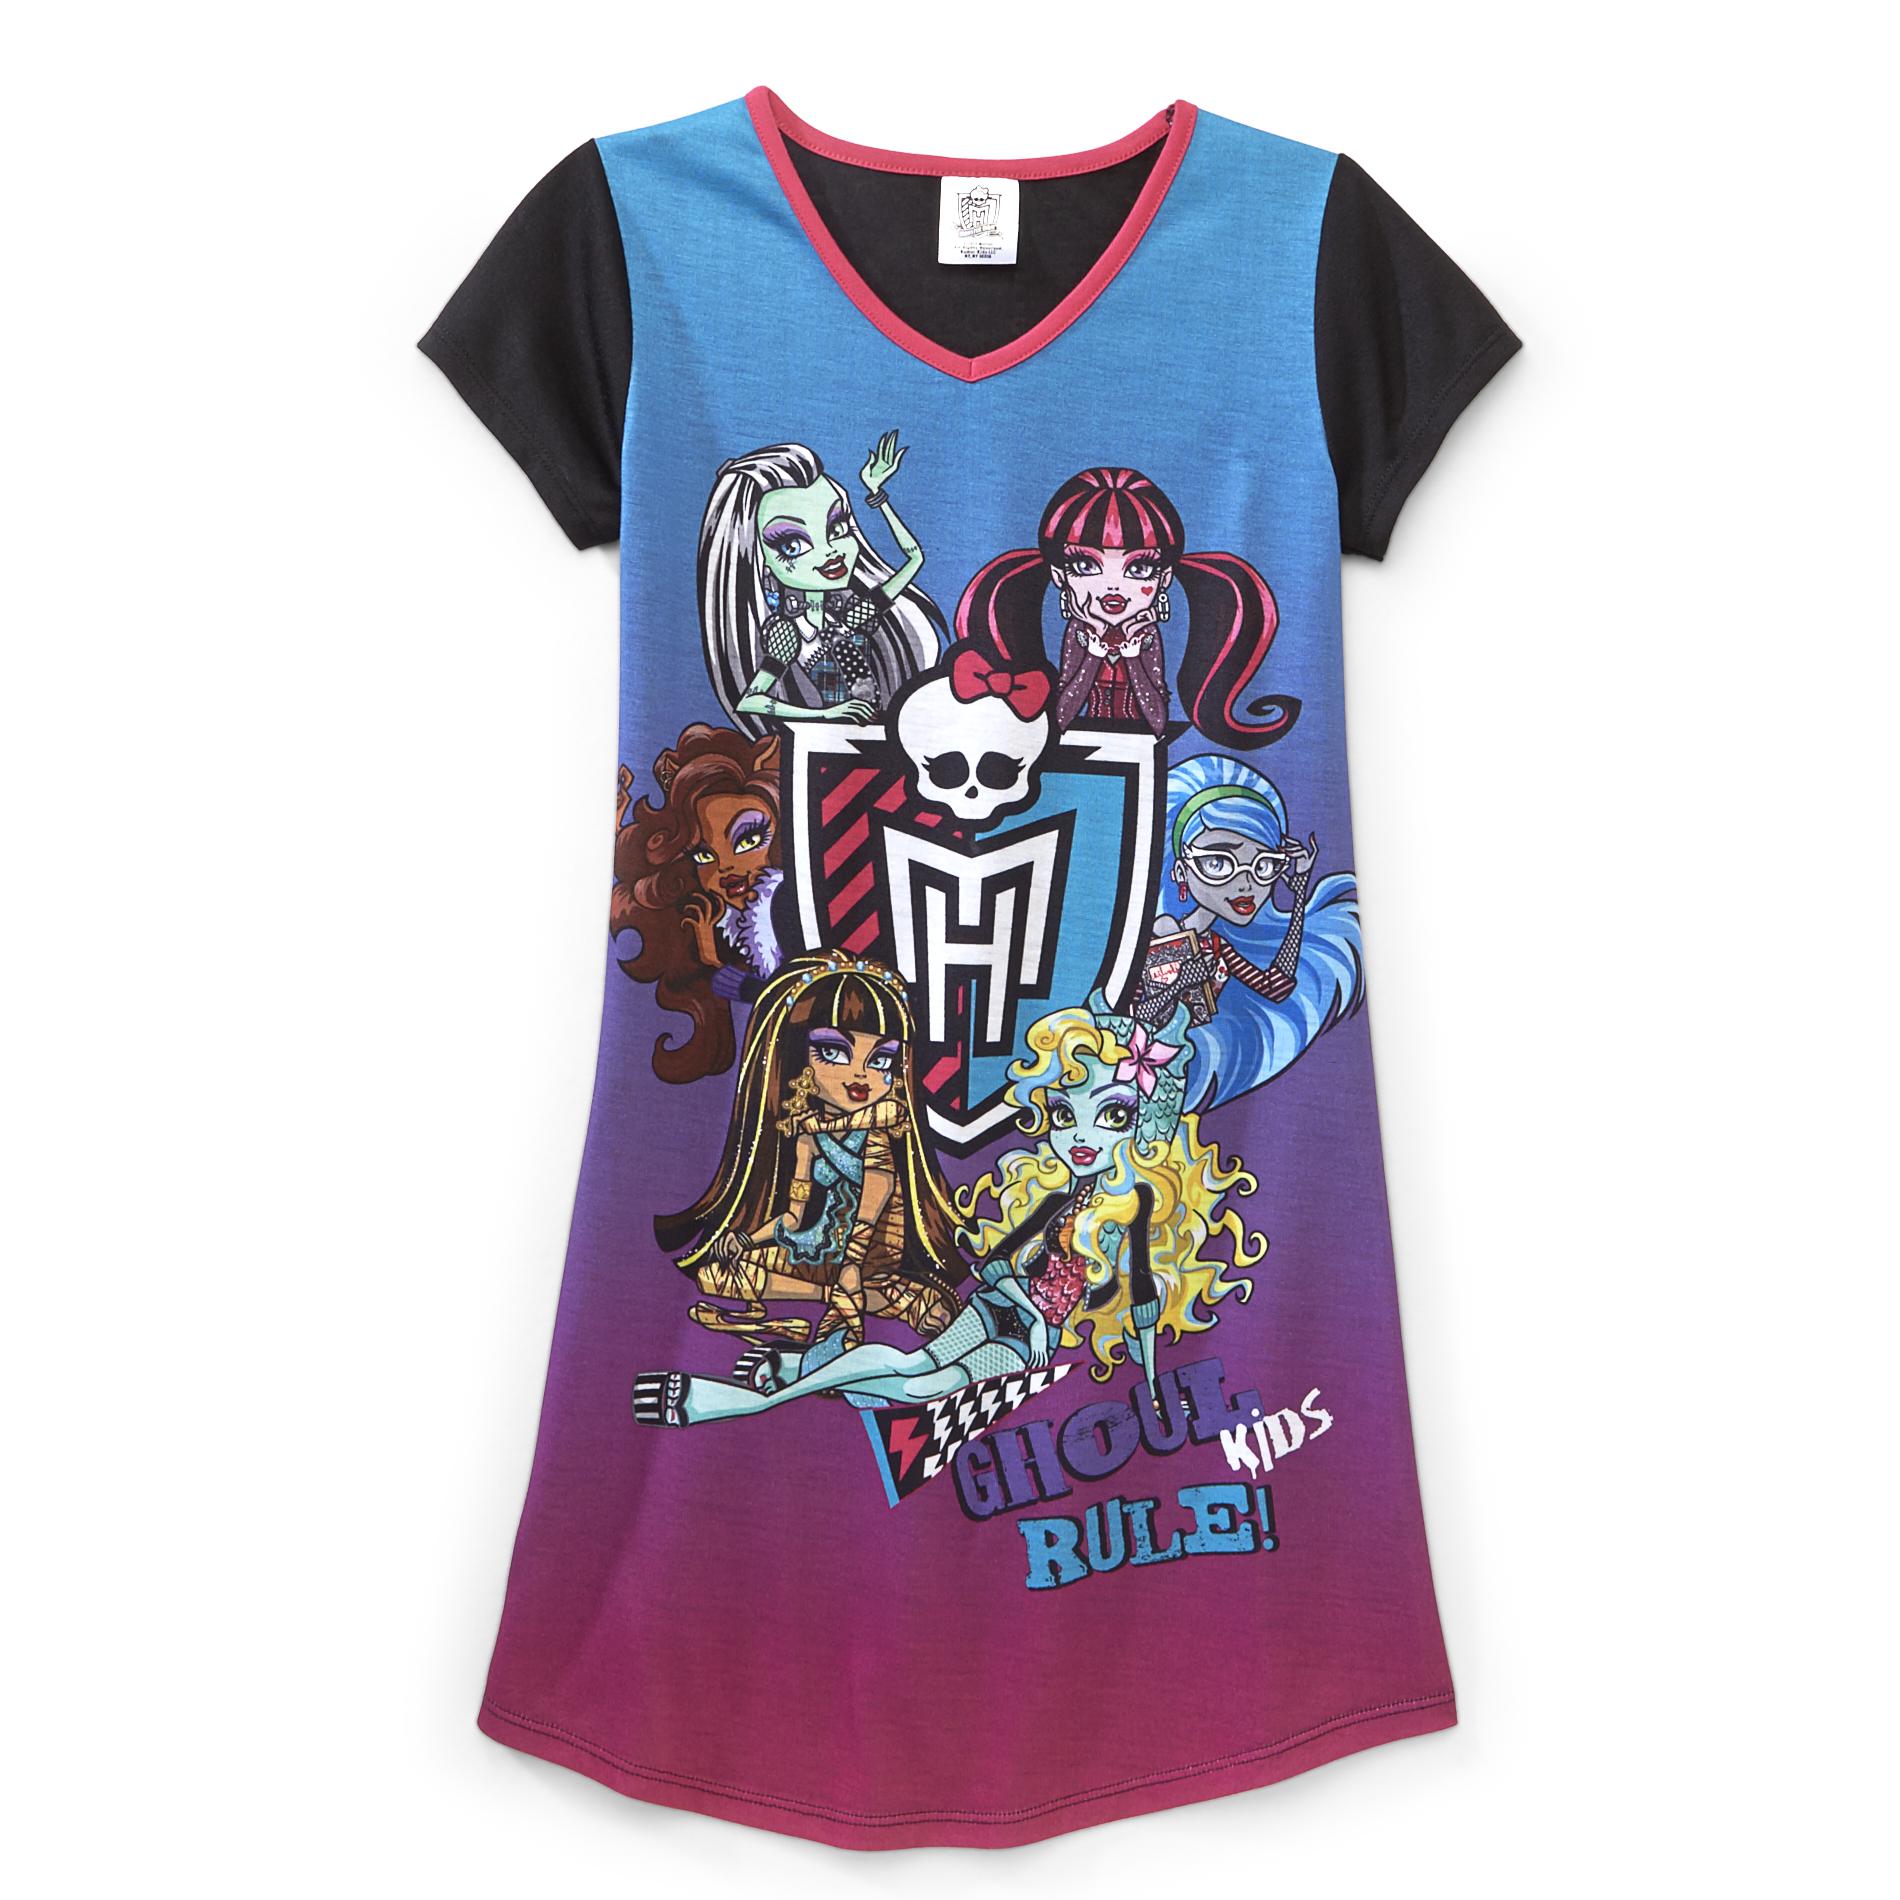 Monster High Girl's Nightgown - Ghoul Kids Rule